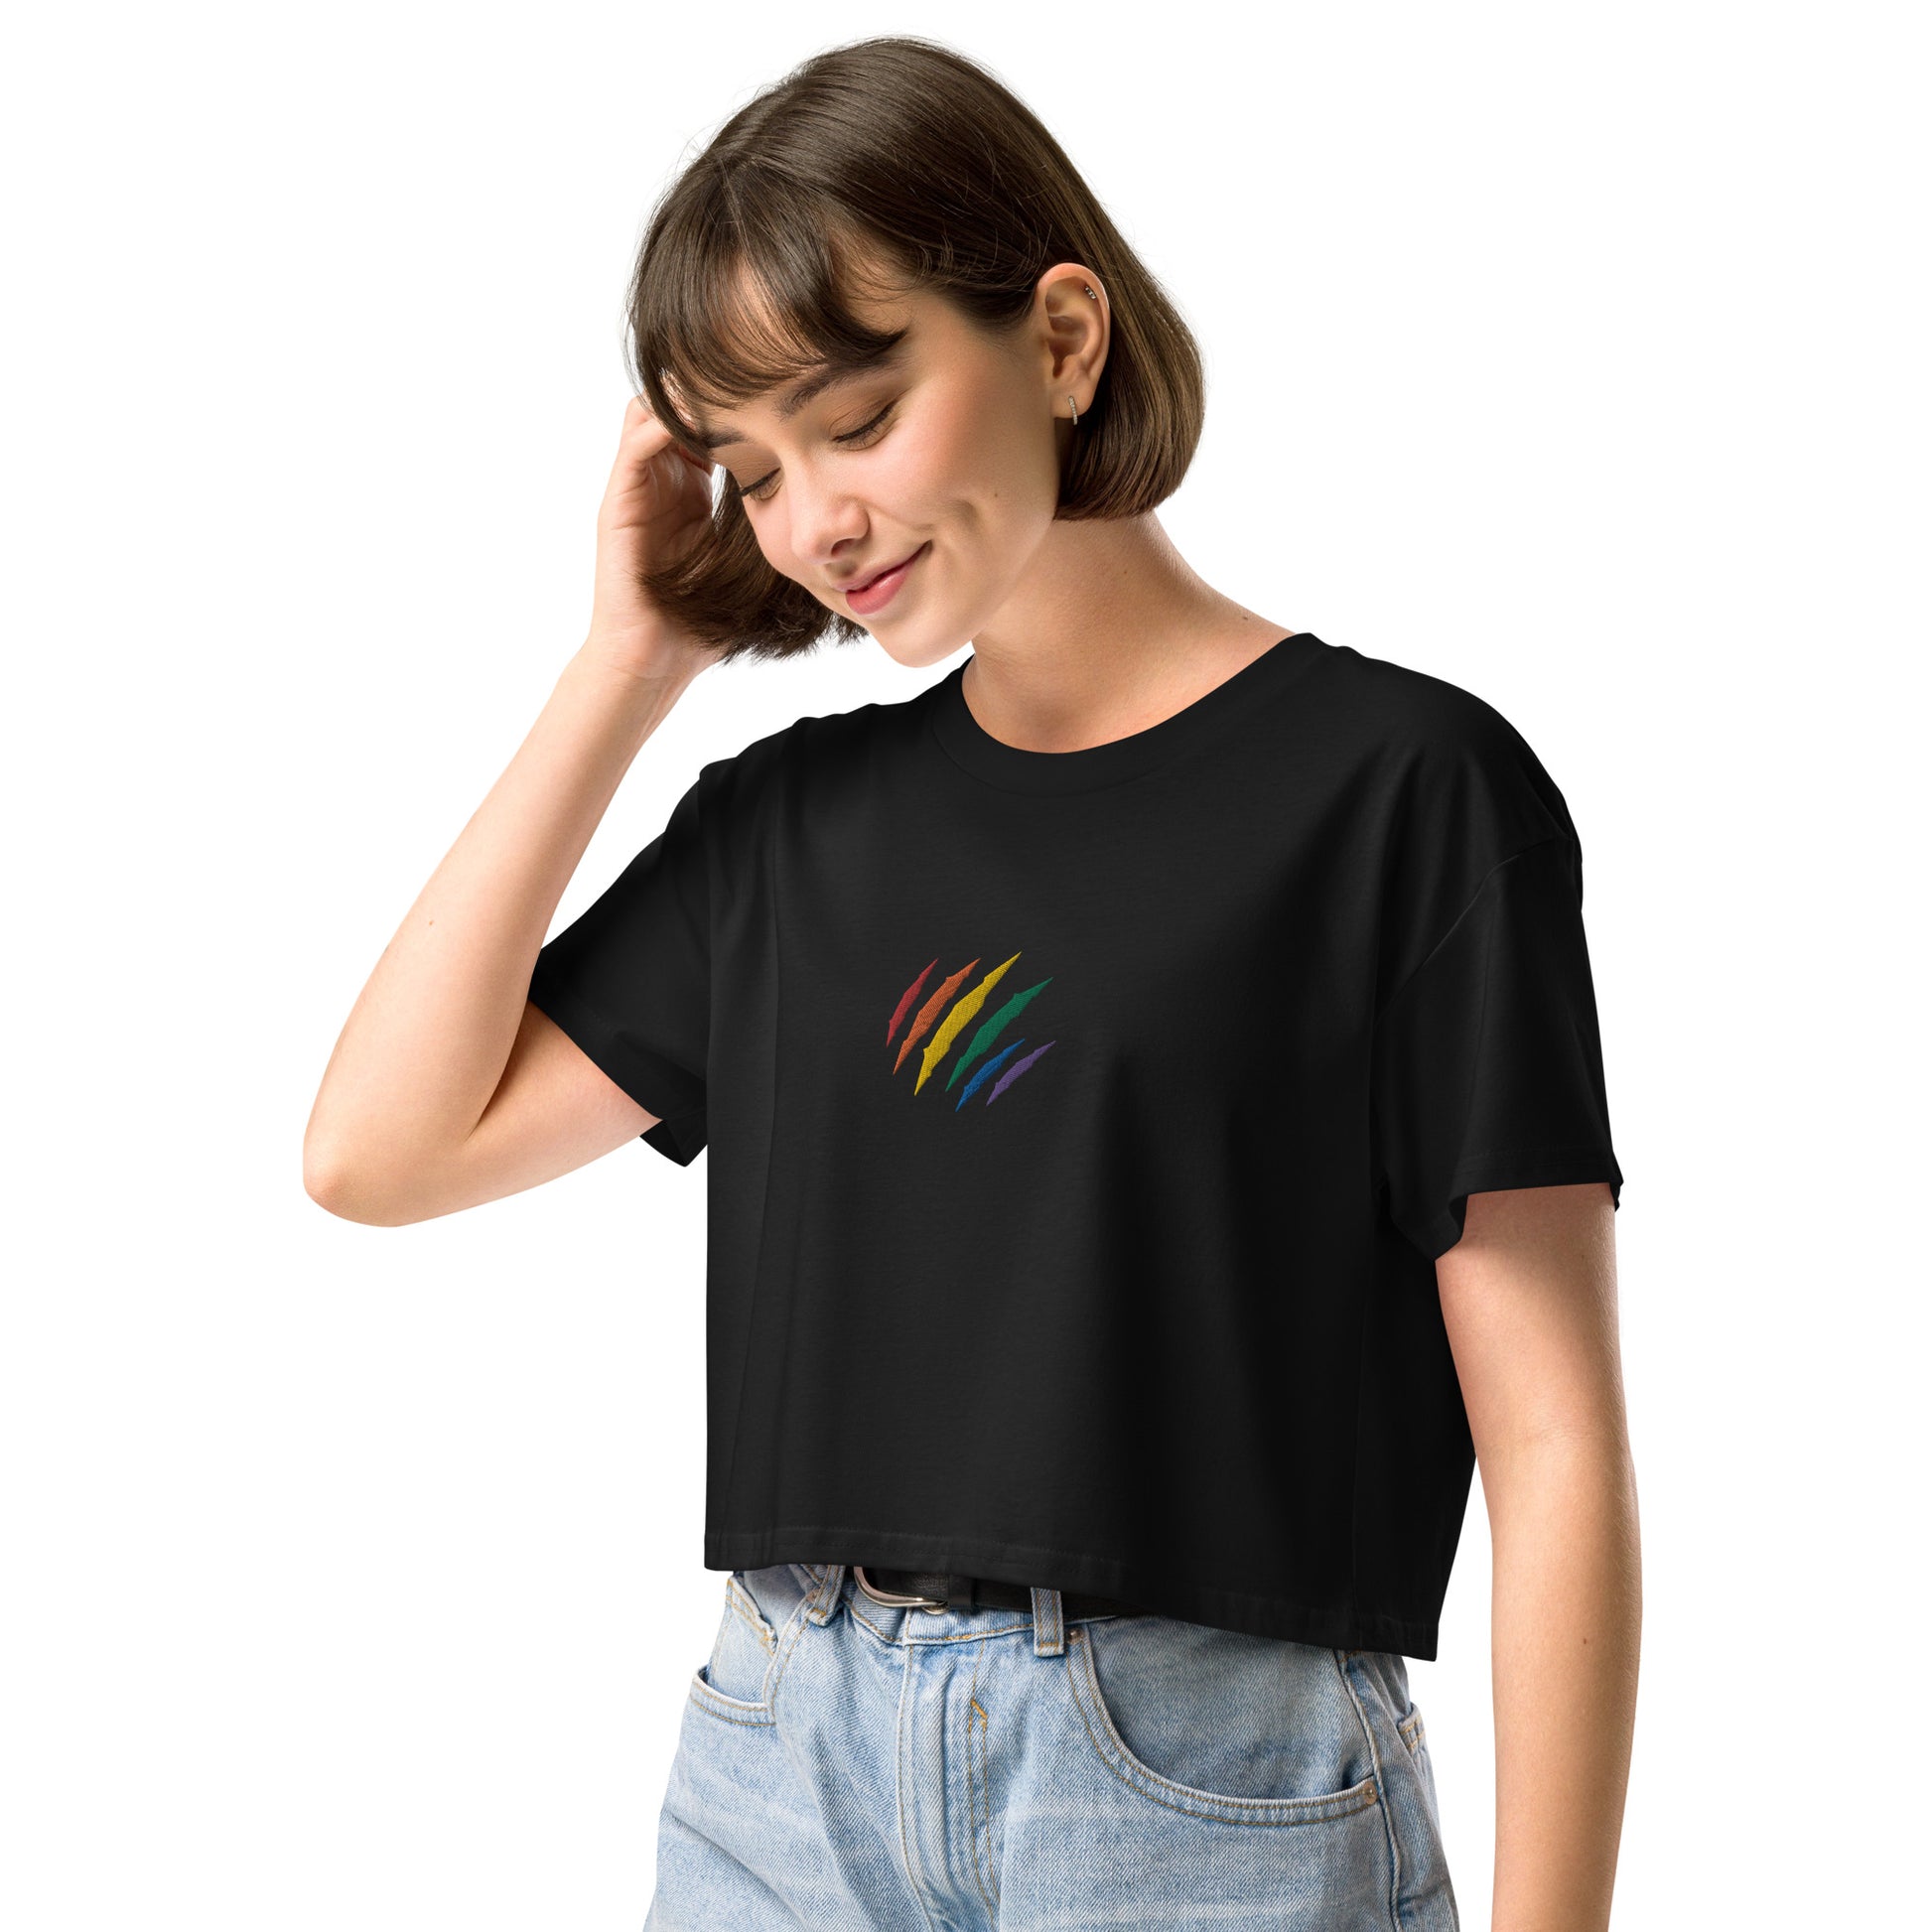 A female model wearing a relaxed, modest black crop top features a subtle rainbow mark embroidery. Adding a touch of rainbow to your look—a playful celebration of lgbtq culture! Made from 100% combed cotton. Available in Extra Small, Small, Medium, Large, Extra Large.